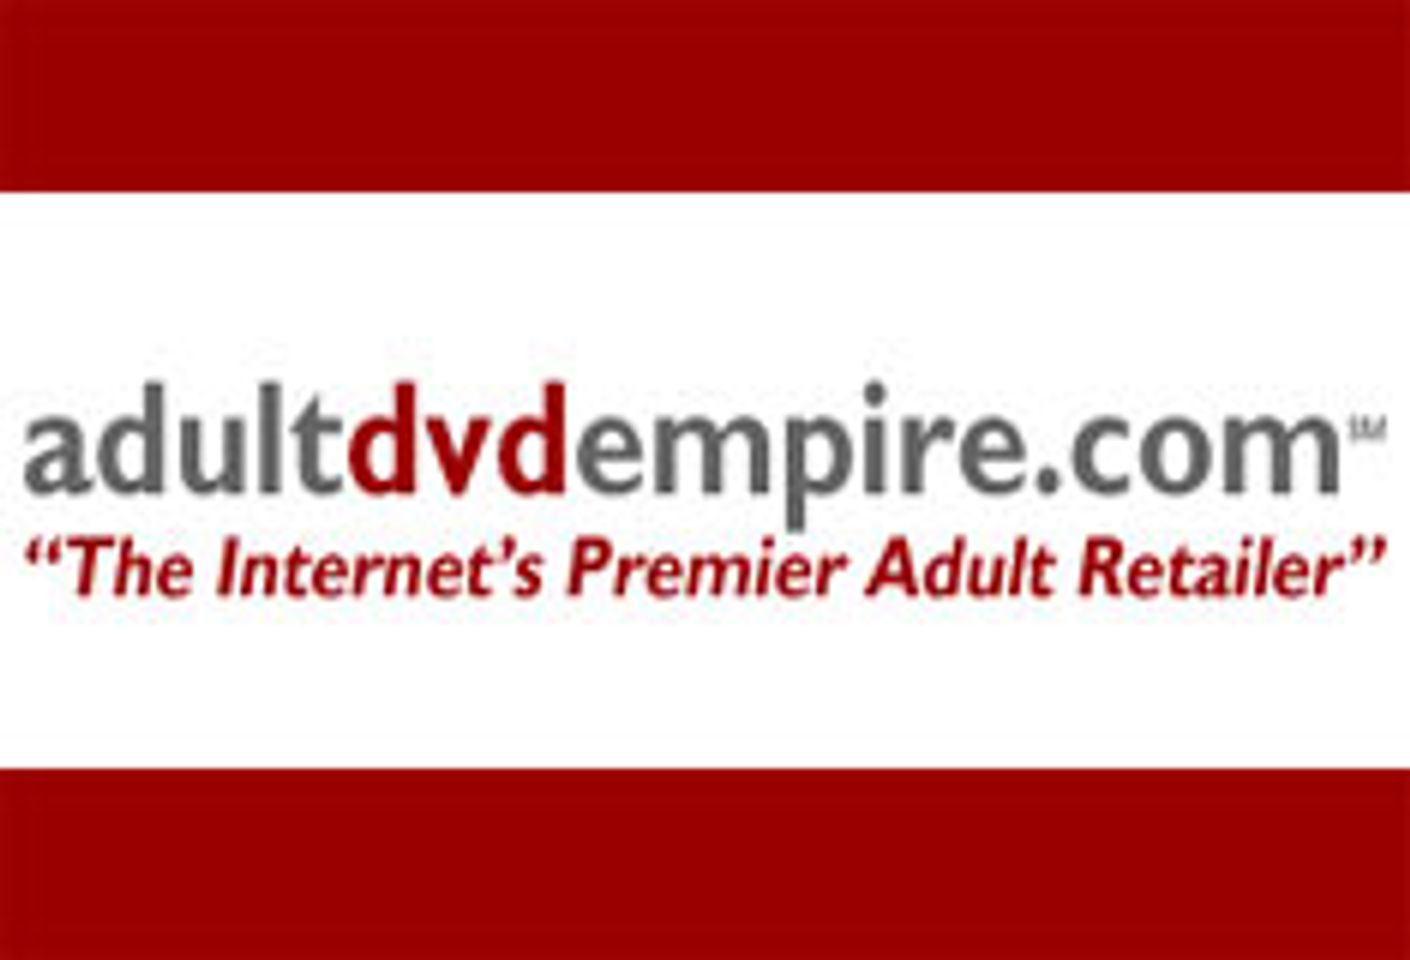 Adult DVD Empire Offers New International Shipping Options